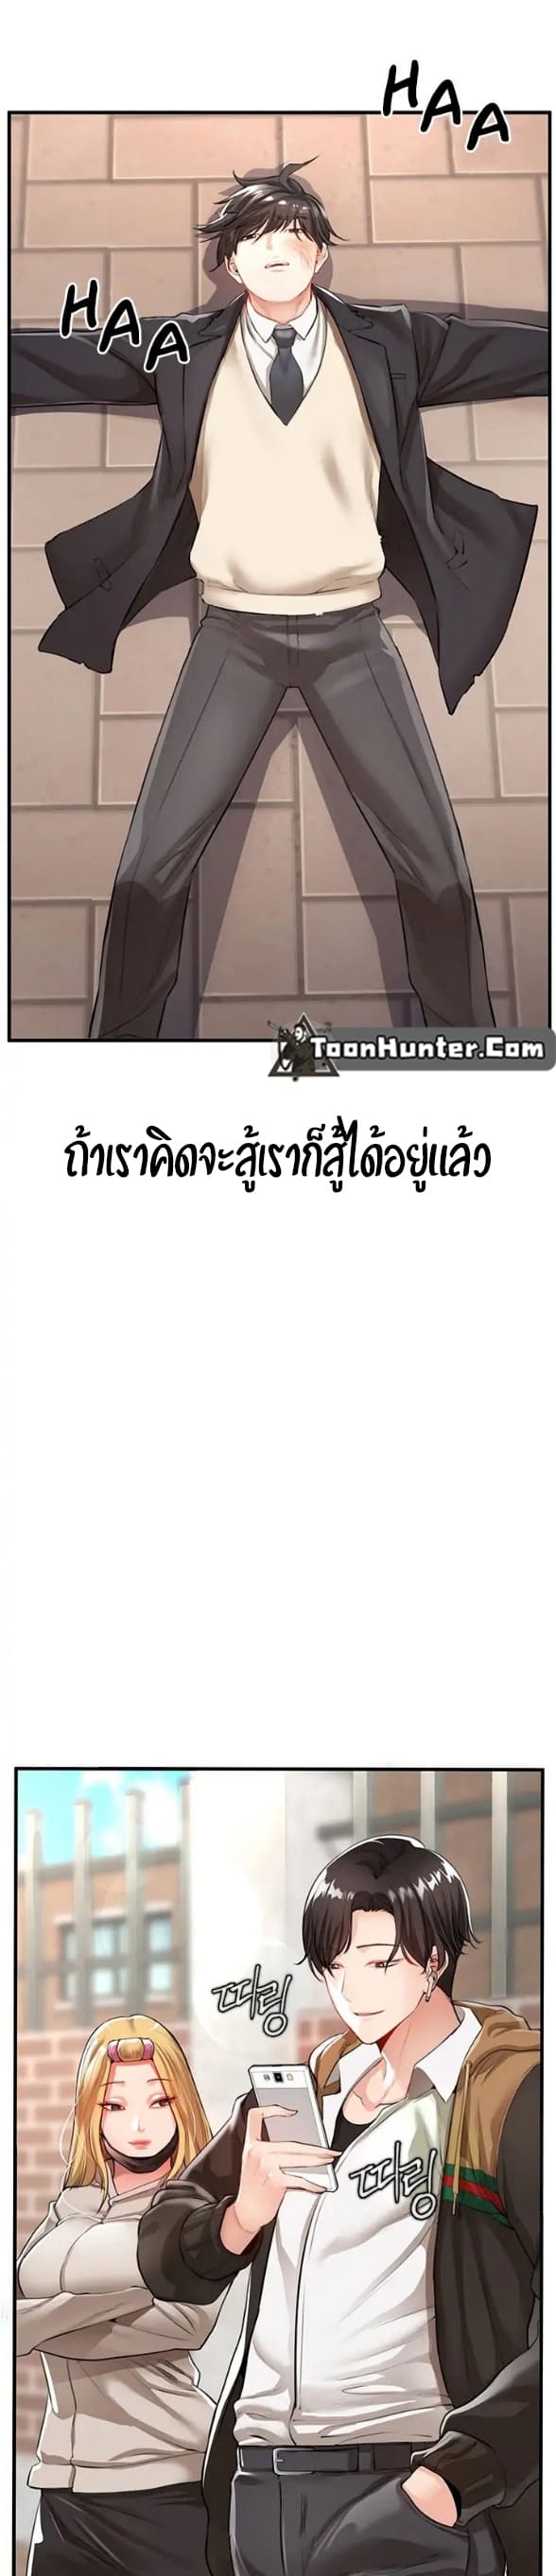 The Real Deal ตอนที่ 1 ภาพ 12